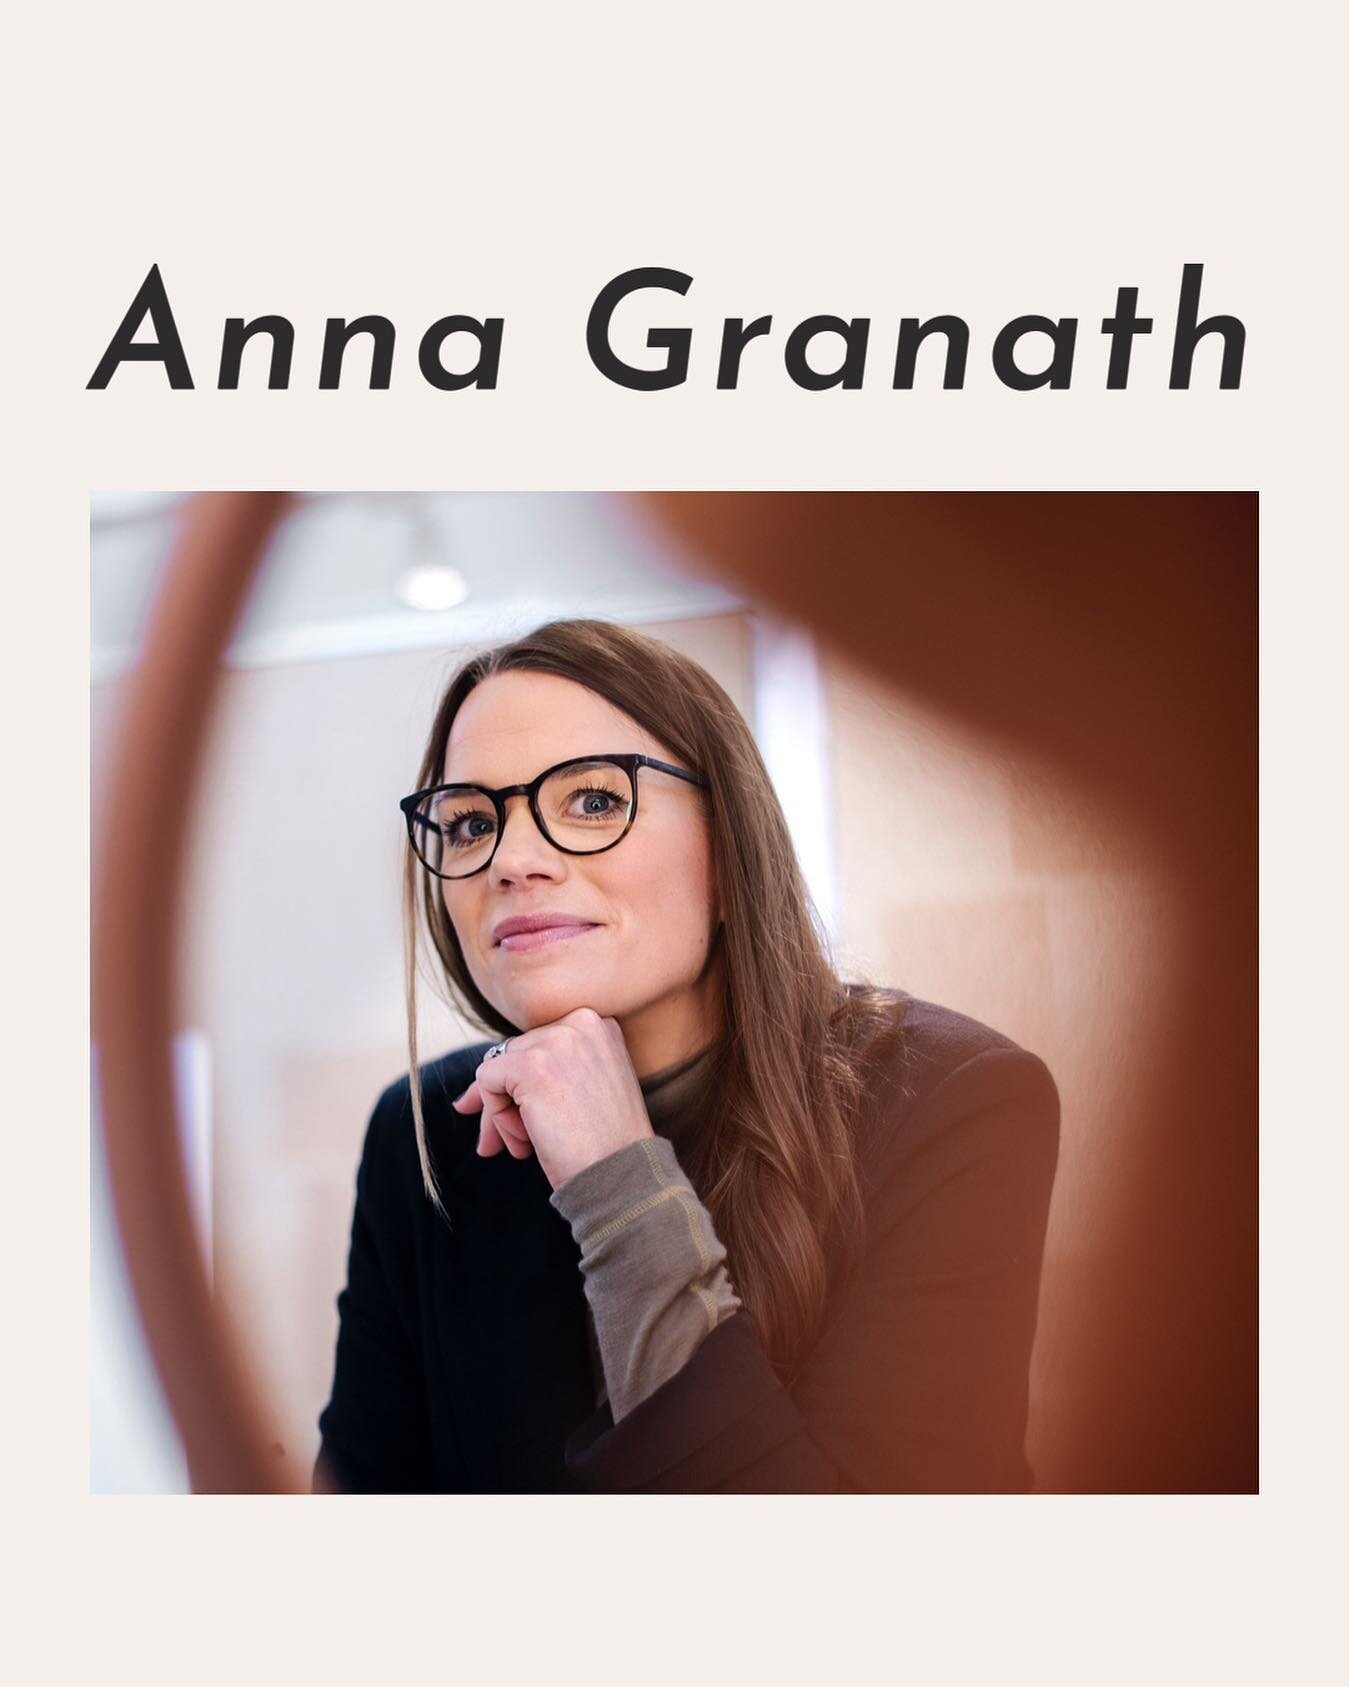 L A M P is very excited to announce the addition of Anna Granath to our 2022 International Lighting Design Competition Judging Panel! 

Anna Granath is the Range &amp; Product Design Manager at IKEA of Sweden for Lighting and Children&rsquo;s IKEA. S